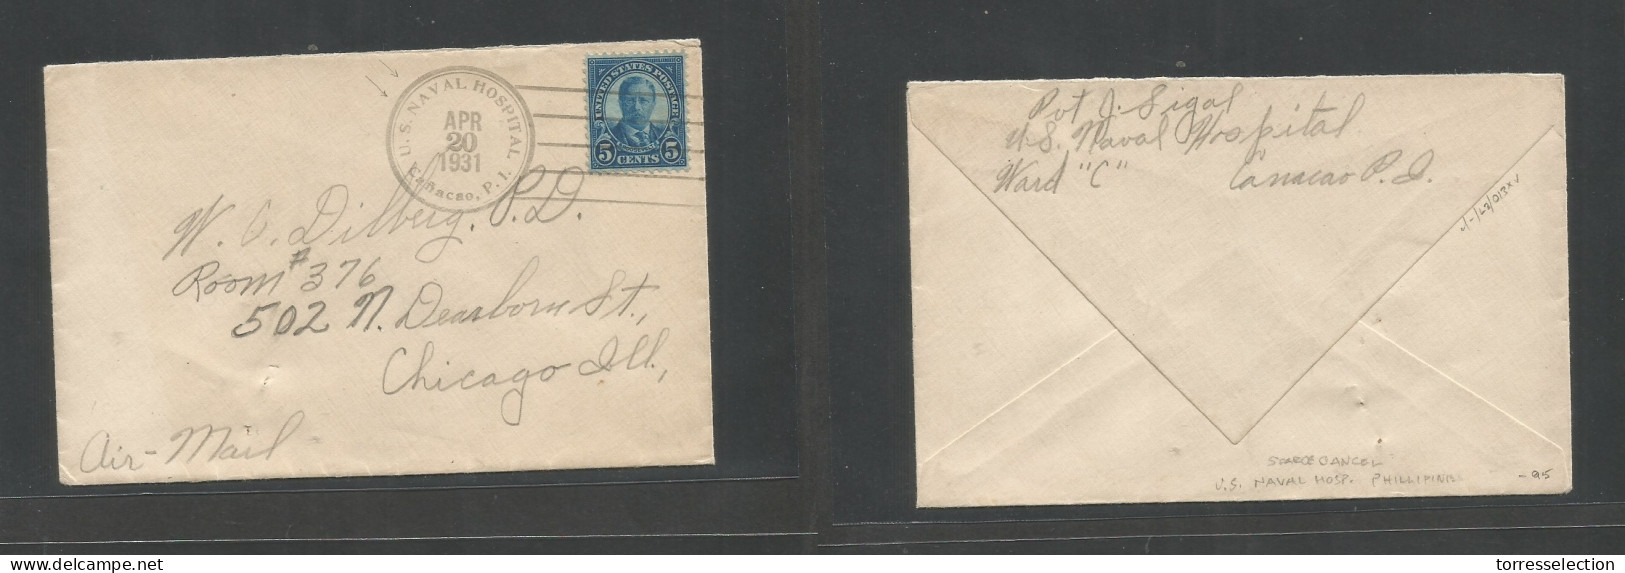 PHILIPPINES. 1931 (20 Apr) US Naval Hospital, Cañacao - USA, Chicago, Ill. Fkd Env 5c Blue, Tied Cds Grill. Airmail Endo - Filipinas